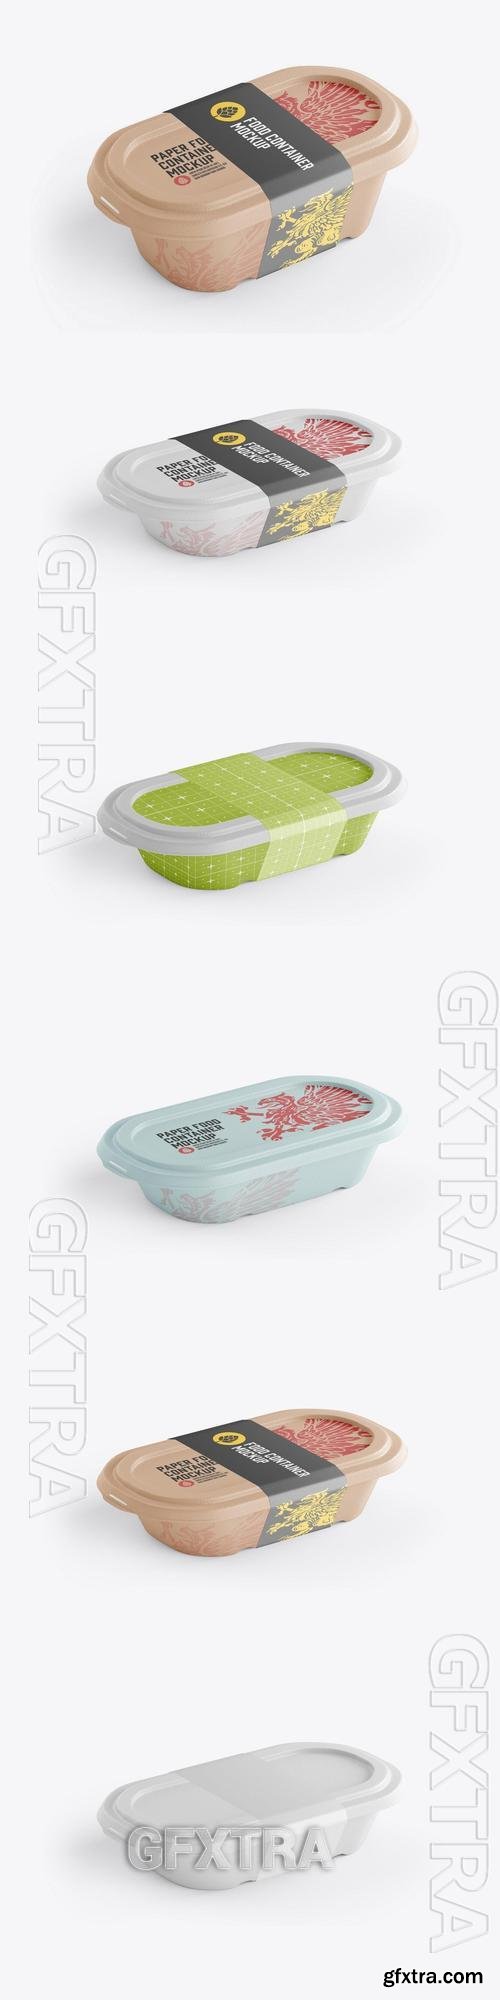 Food Container with Sleeve Mockup XAGWWB3